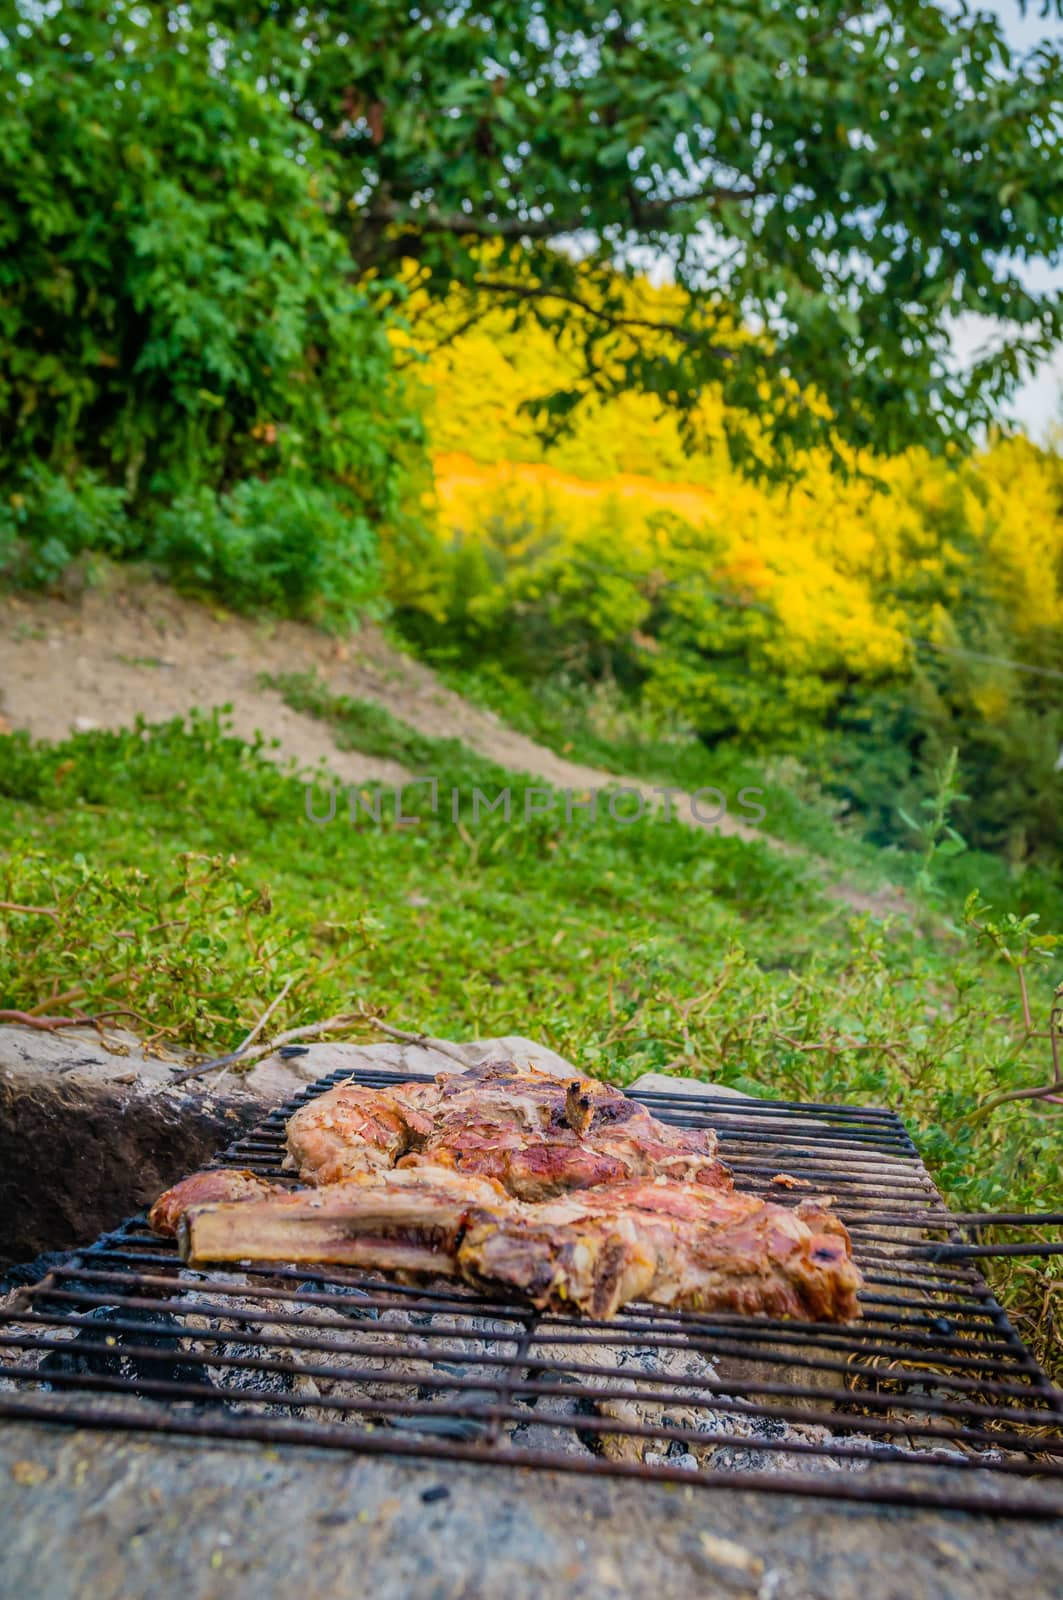 BBQ in the forest at sunset with pork ribs